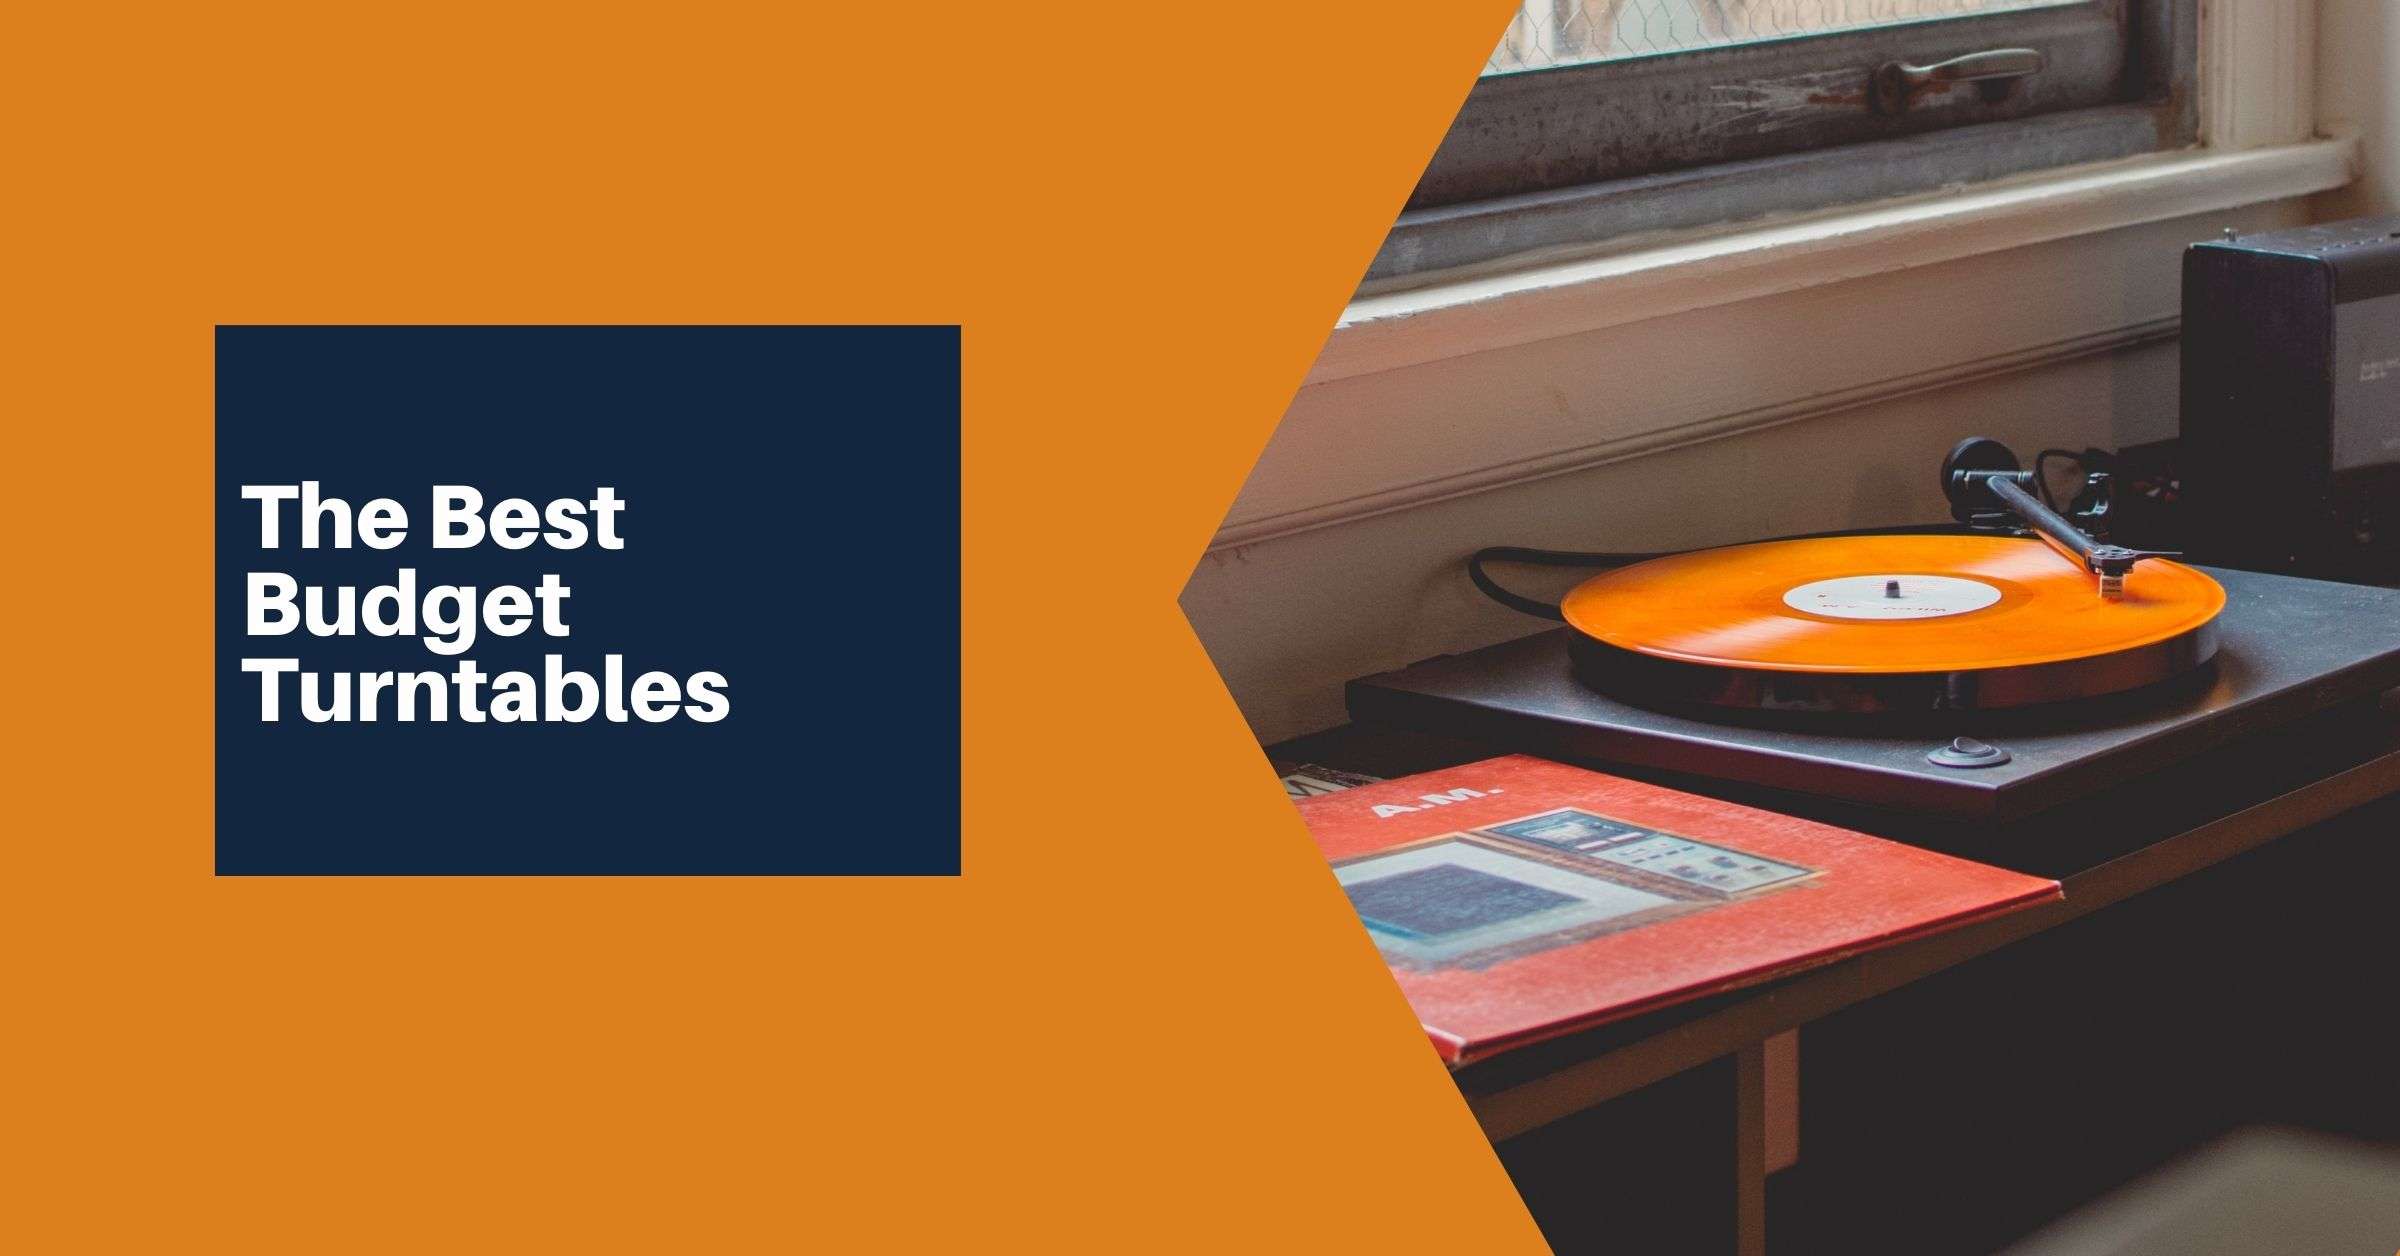 The best budget turntables and record players